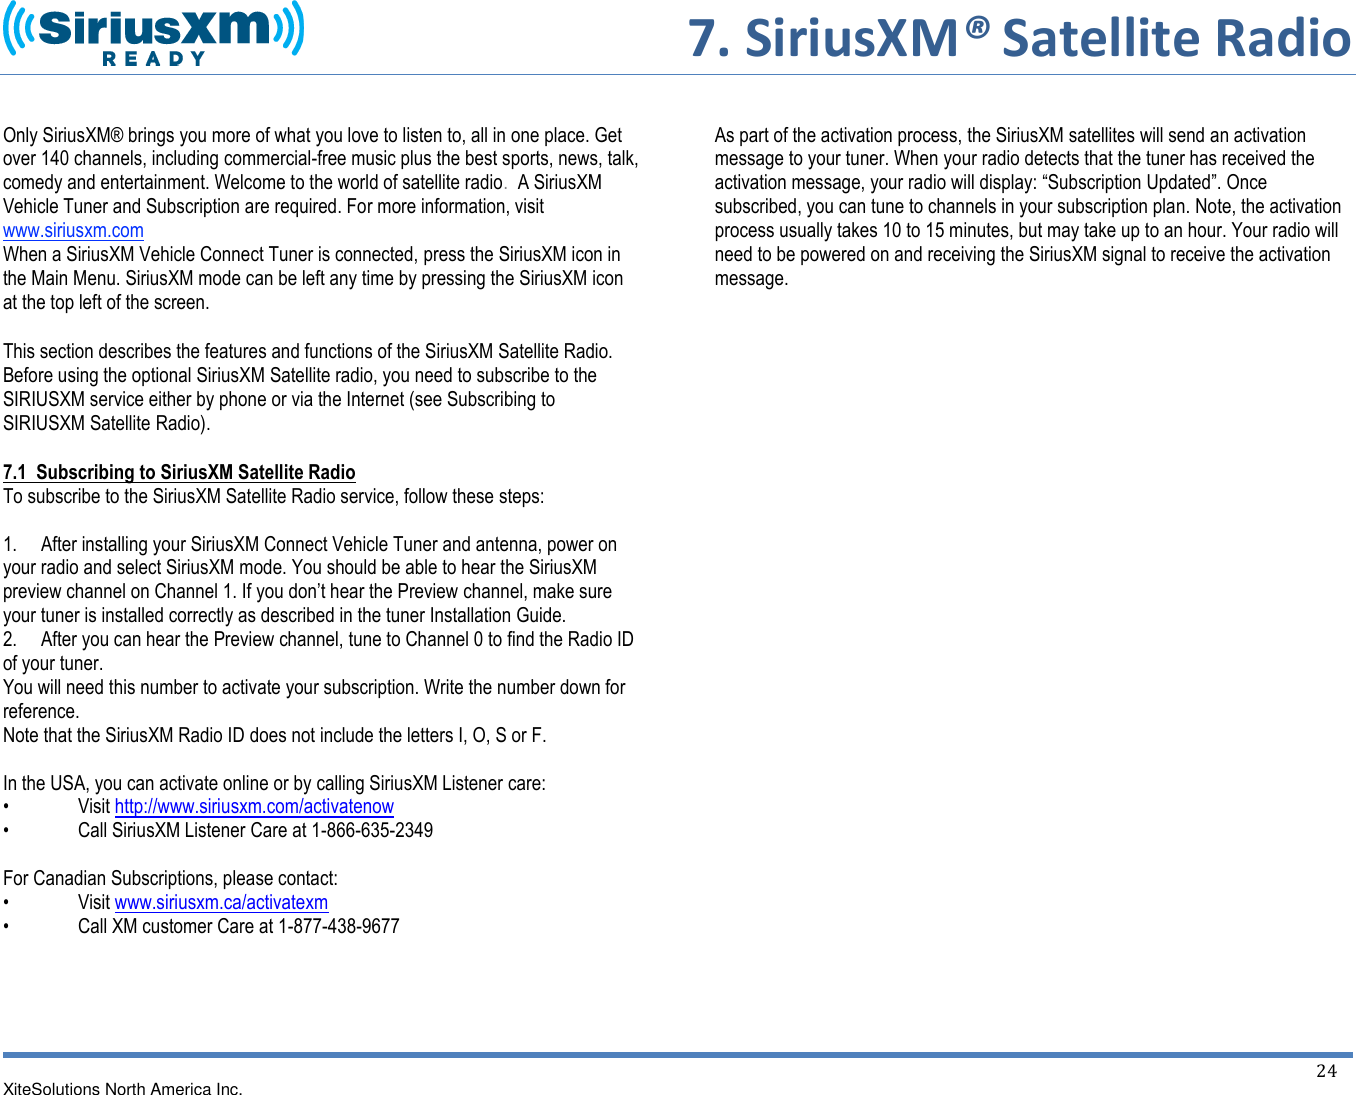     7. SiriusXM® Satellite Radio  XiteSolutions North America Inc.    24   Only SiriusXM® brings you more of what you love to listen to, all in one place. Get over 140 channels, including commercial-free music plus the best sports, news, talk, comedy and entertainment. Welcome to the world of satellite radio.  A SiriusXM Vehicle Tuner and Subscription are required. For more information, visit www.siriusxm.com When a SiriusXM Vehicle Connect Tuner is connected, press the SiriusXM icon in the Main Menu. SiriusXM mode can be left any time by pressing the SiriusXM icon at the top left of the screen.  This section describes the features and functions of the SiriusXM Satellite Radio. Before using the optional SiriusXM Satellite radio, you need to subscribe to the SIRIUSXM service either by phone or via the Internet (see Subscribing to SIRIUSXM Satellite Radio). 7.1  Subscribing to SiriusXM Satellite Radio To subscribe to the SiriusXM Satellite Radio service, follow these steps:  1.     After installing your SiriusXM Connect Vehicle Tuner and antenna, power on your radio and select SiriusXM mode. You should be able to hear the SiriusXM preview channel on Channel 1. If you don’t hear the Preview channel, make sure your tuner is installed correctly as described in the tuner Installation Guide. 2.     After you can hear the Preview channel, tune to Channel 0 to find the Radio ID of your tuner. You will need this number to activate your subscription. Write the number down for reference. Note that the SiriusXM Radio ID does not include the letters I, O, S or F.  In the USA, you can activate online or by calling SiriusXM Listener care:  •  Visit http://www.siriusxm.com/activatenow •  Call SiriusXM Listener Care at 1-866-635-2349  For Canadian Subscriptions, please contact: •  Visit www.siriusxm.ca/activatexm •  Call XM customer Care at 1-877-438-9677       As part of the activation process, the SiriusXM satellites will send an activation message to your tuner. When your radio detects that the tuner has received the activation message, your radio will display: “Subscription Updated”. Once subscribed, you can tune to channels in your subscription plan. Note, the activation process usually takes 10 to 15 minutes, but may take up to an hour. Your radio will need to be powered on and receiving the SiriusXM signal to receive the activation message.                            